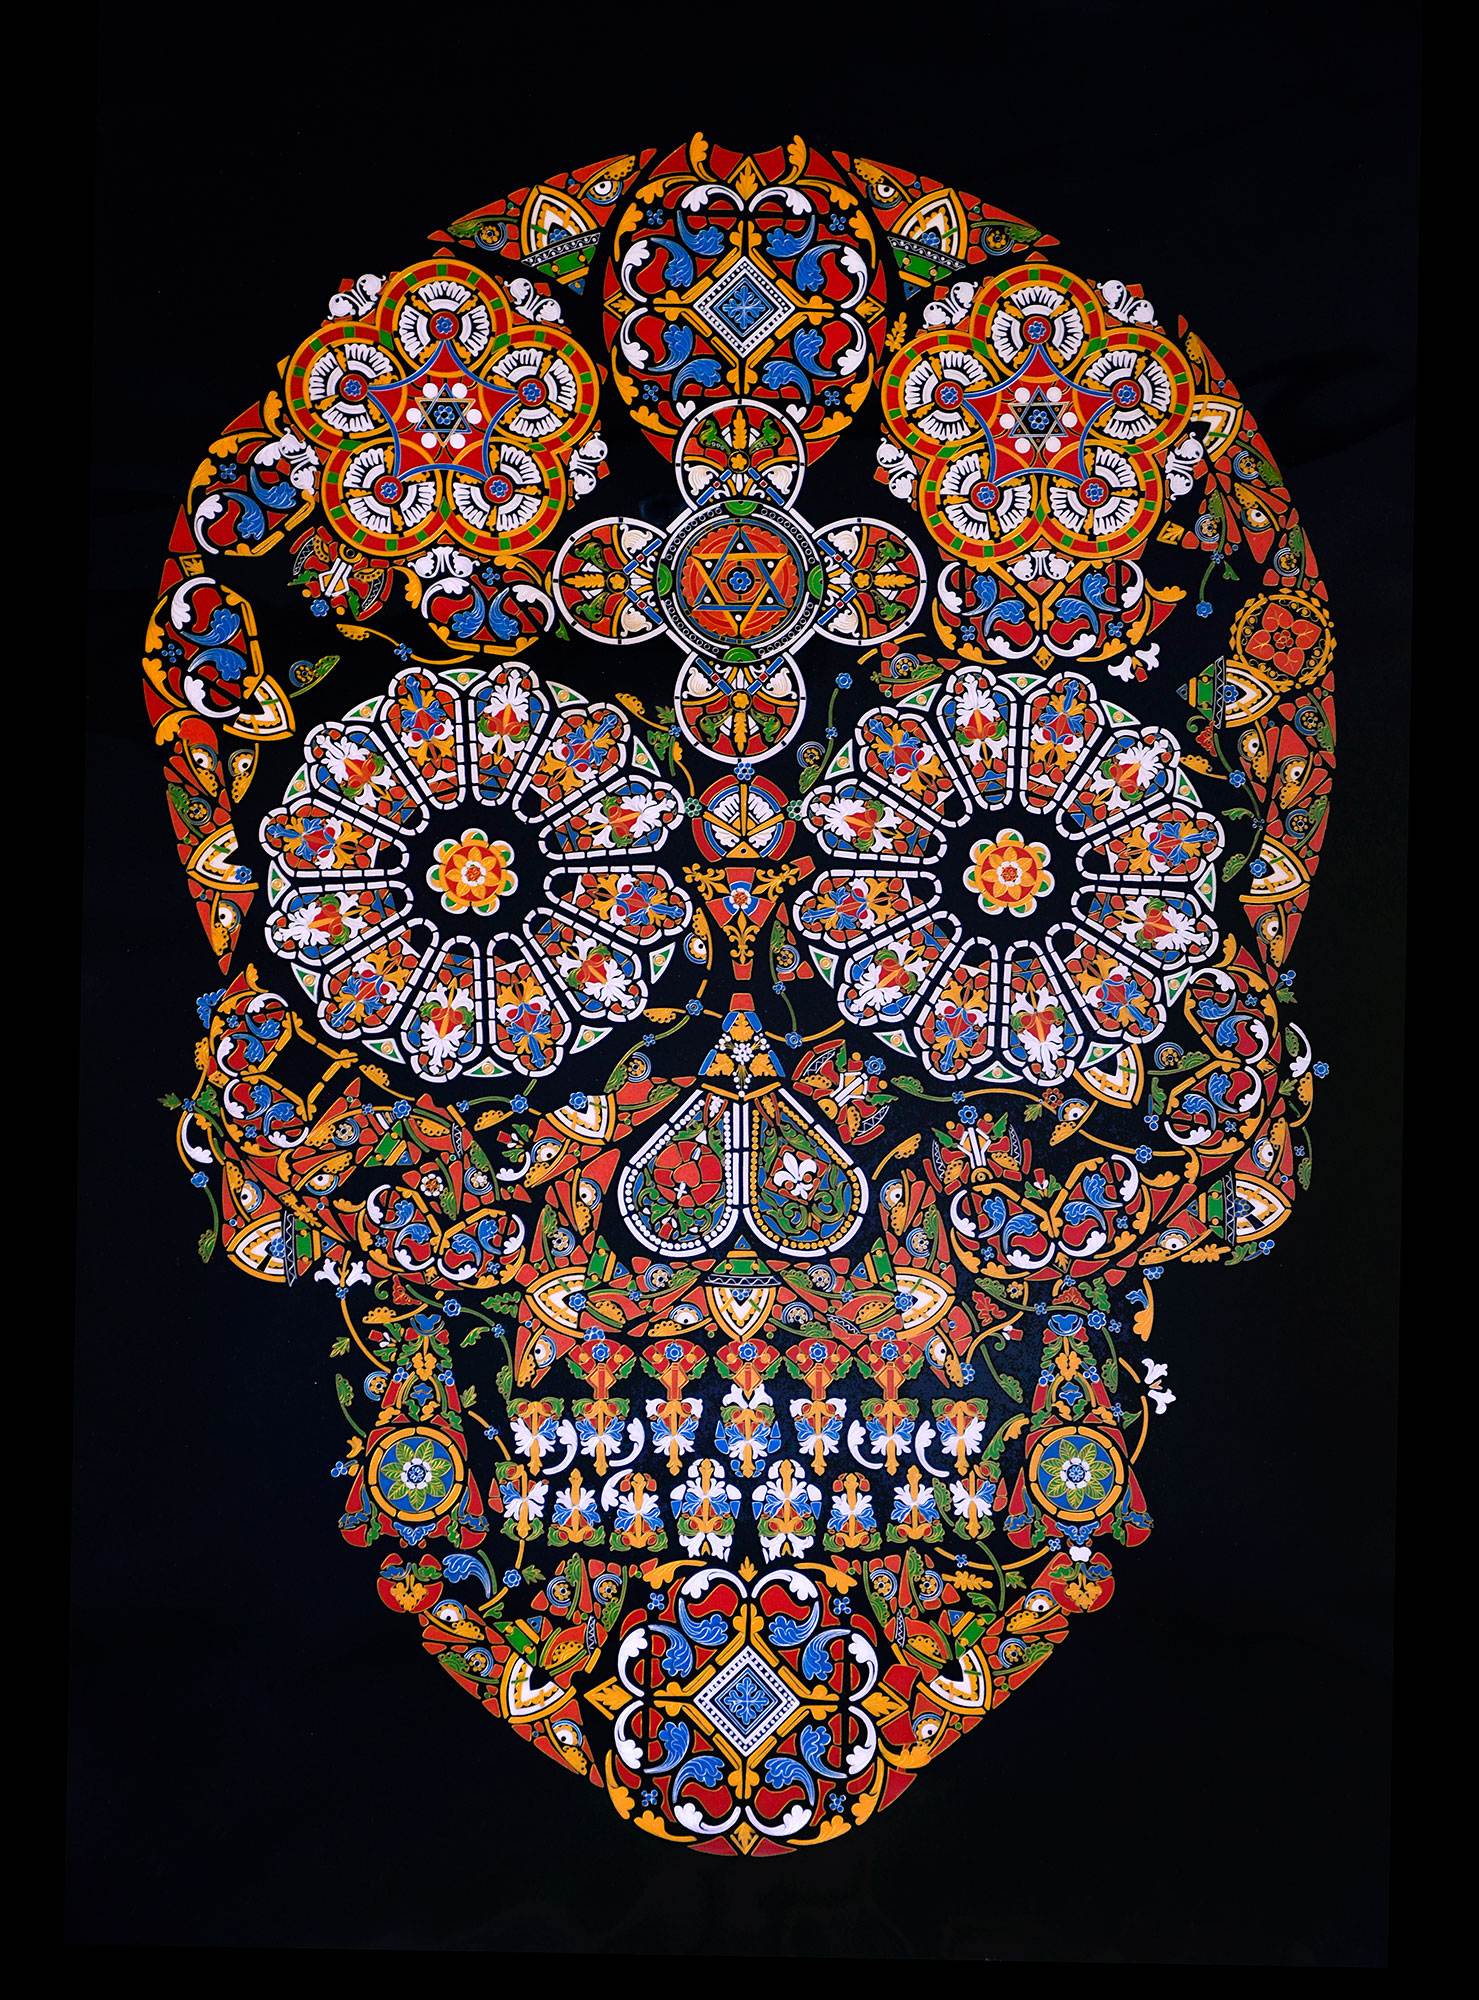 Stained Glass Skull